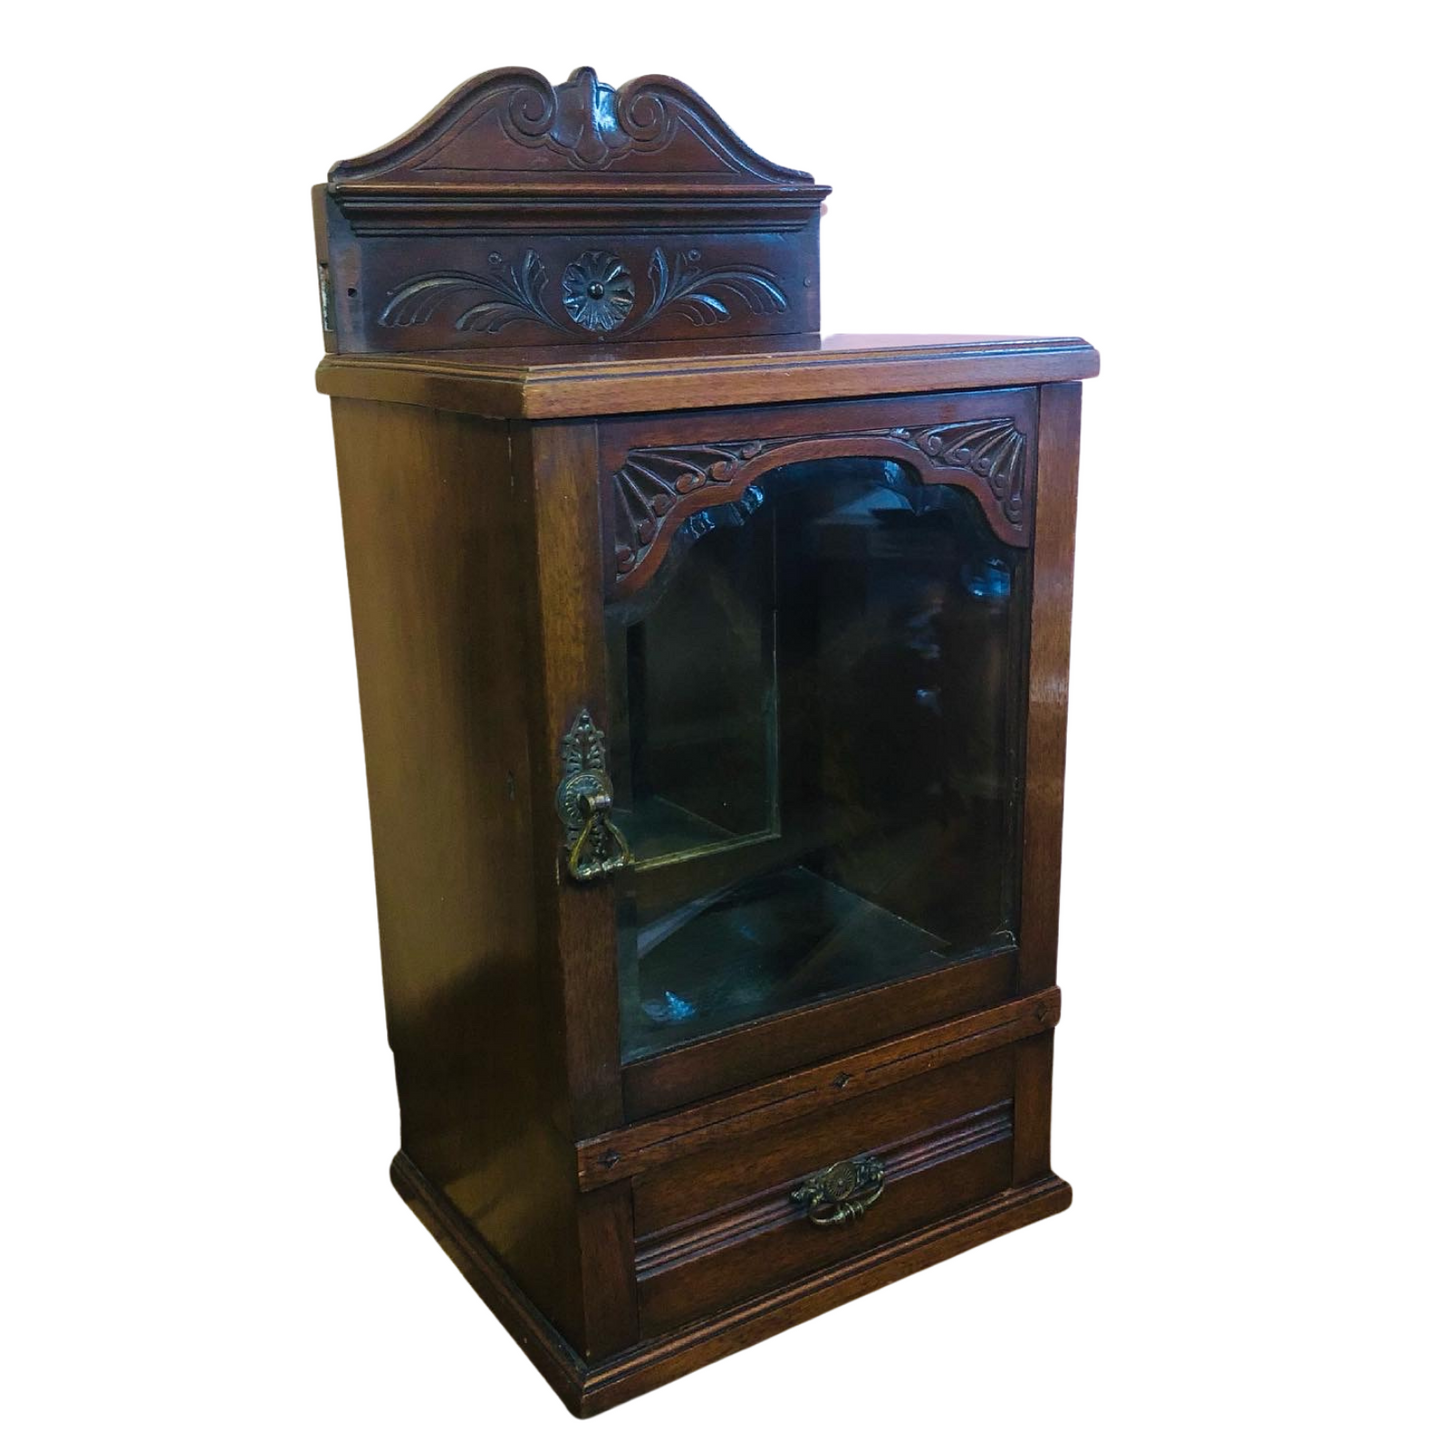 The Skater Albert - Small Antique Mirrored Display Cabinet